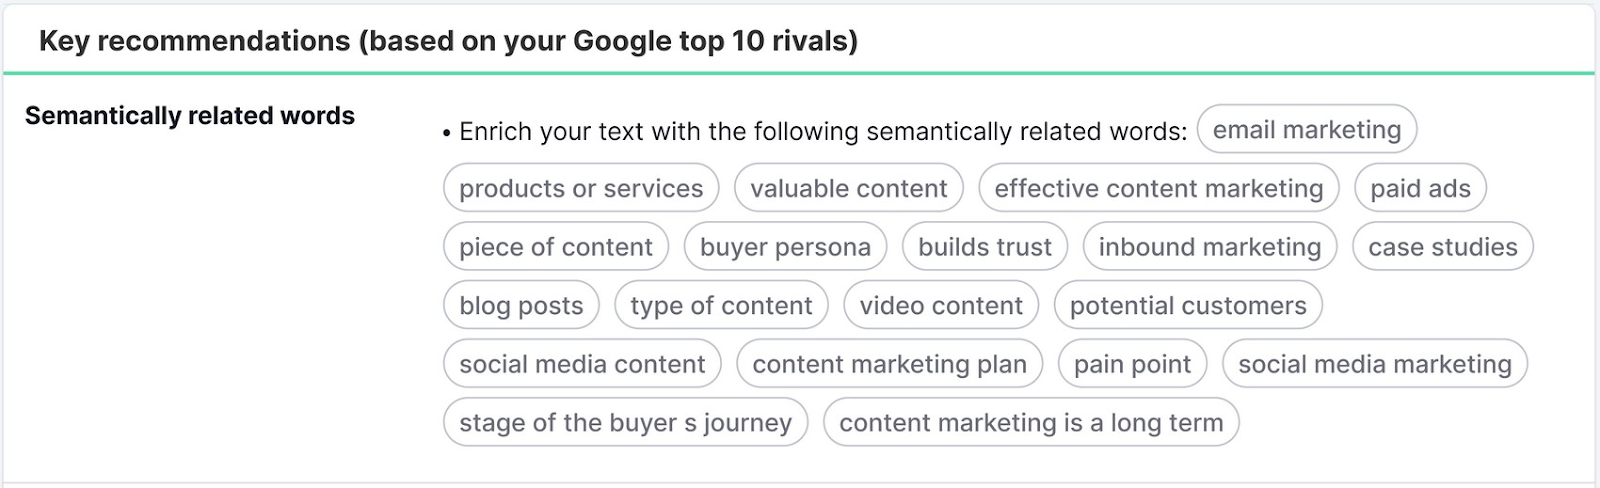 Semantically related keywords for “content marketing” 